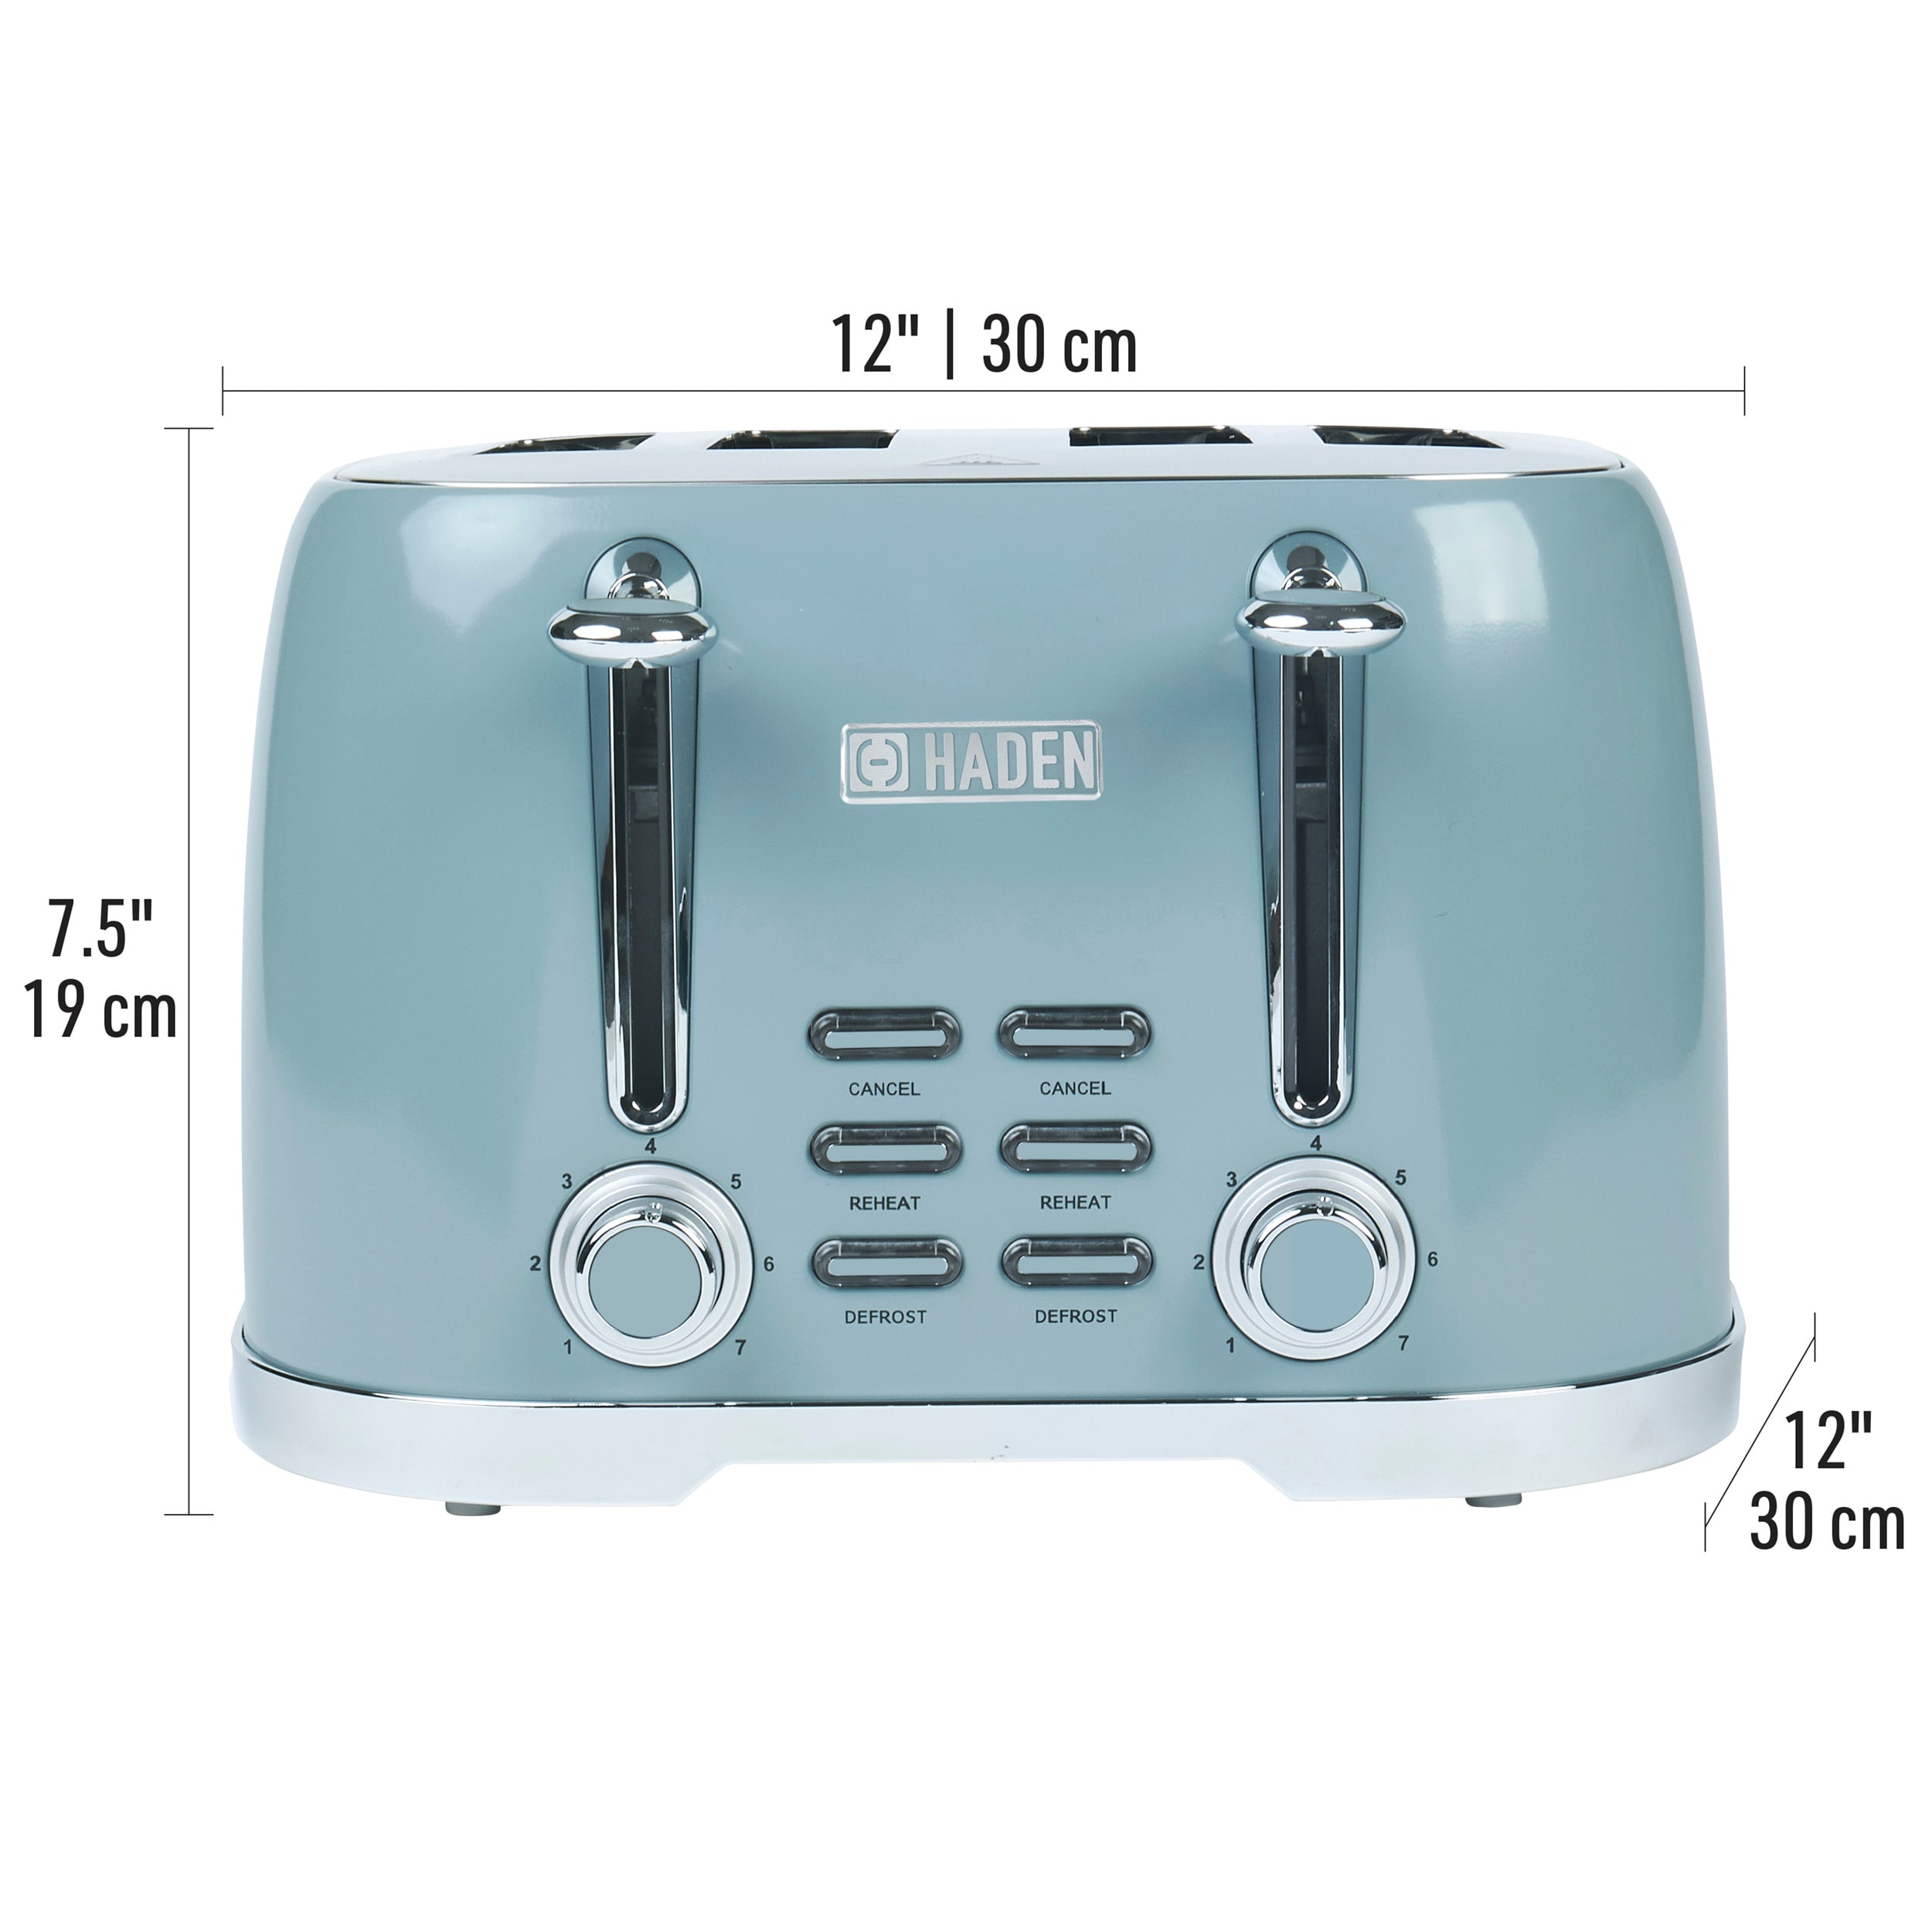 Haden Heritage 12 Cup Programmable Coffee Maker with Toaster, Turquoise 